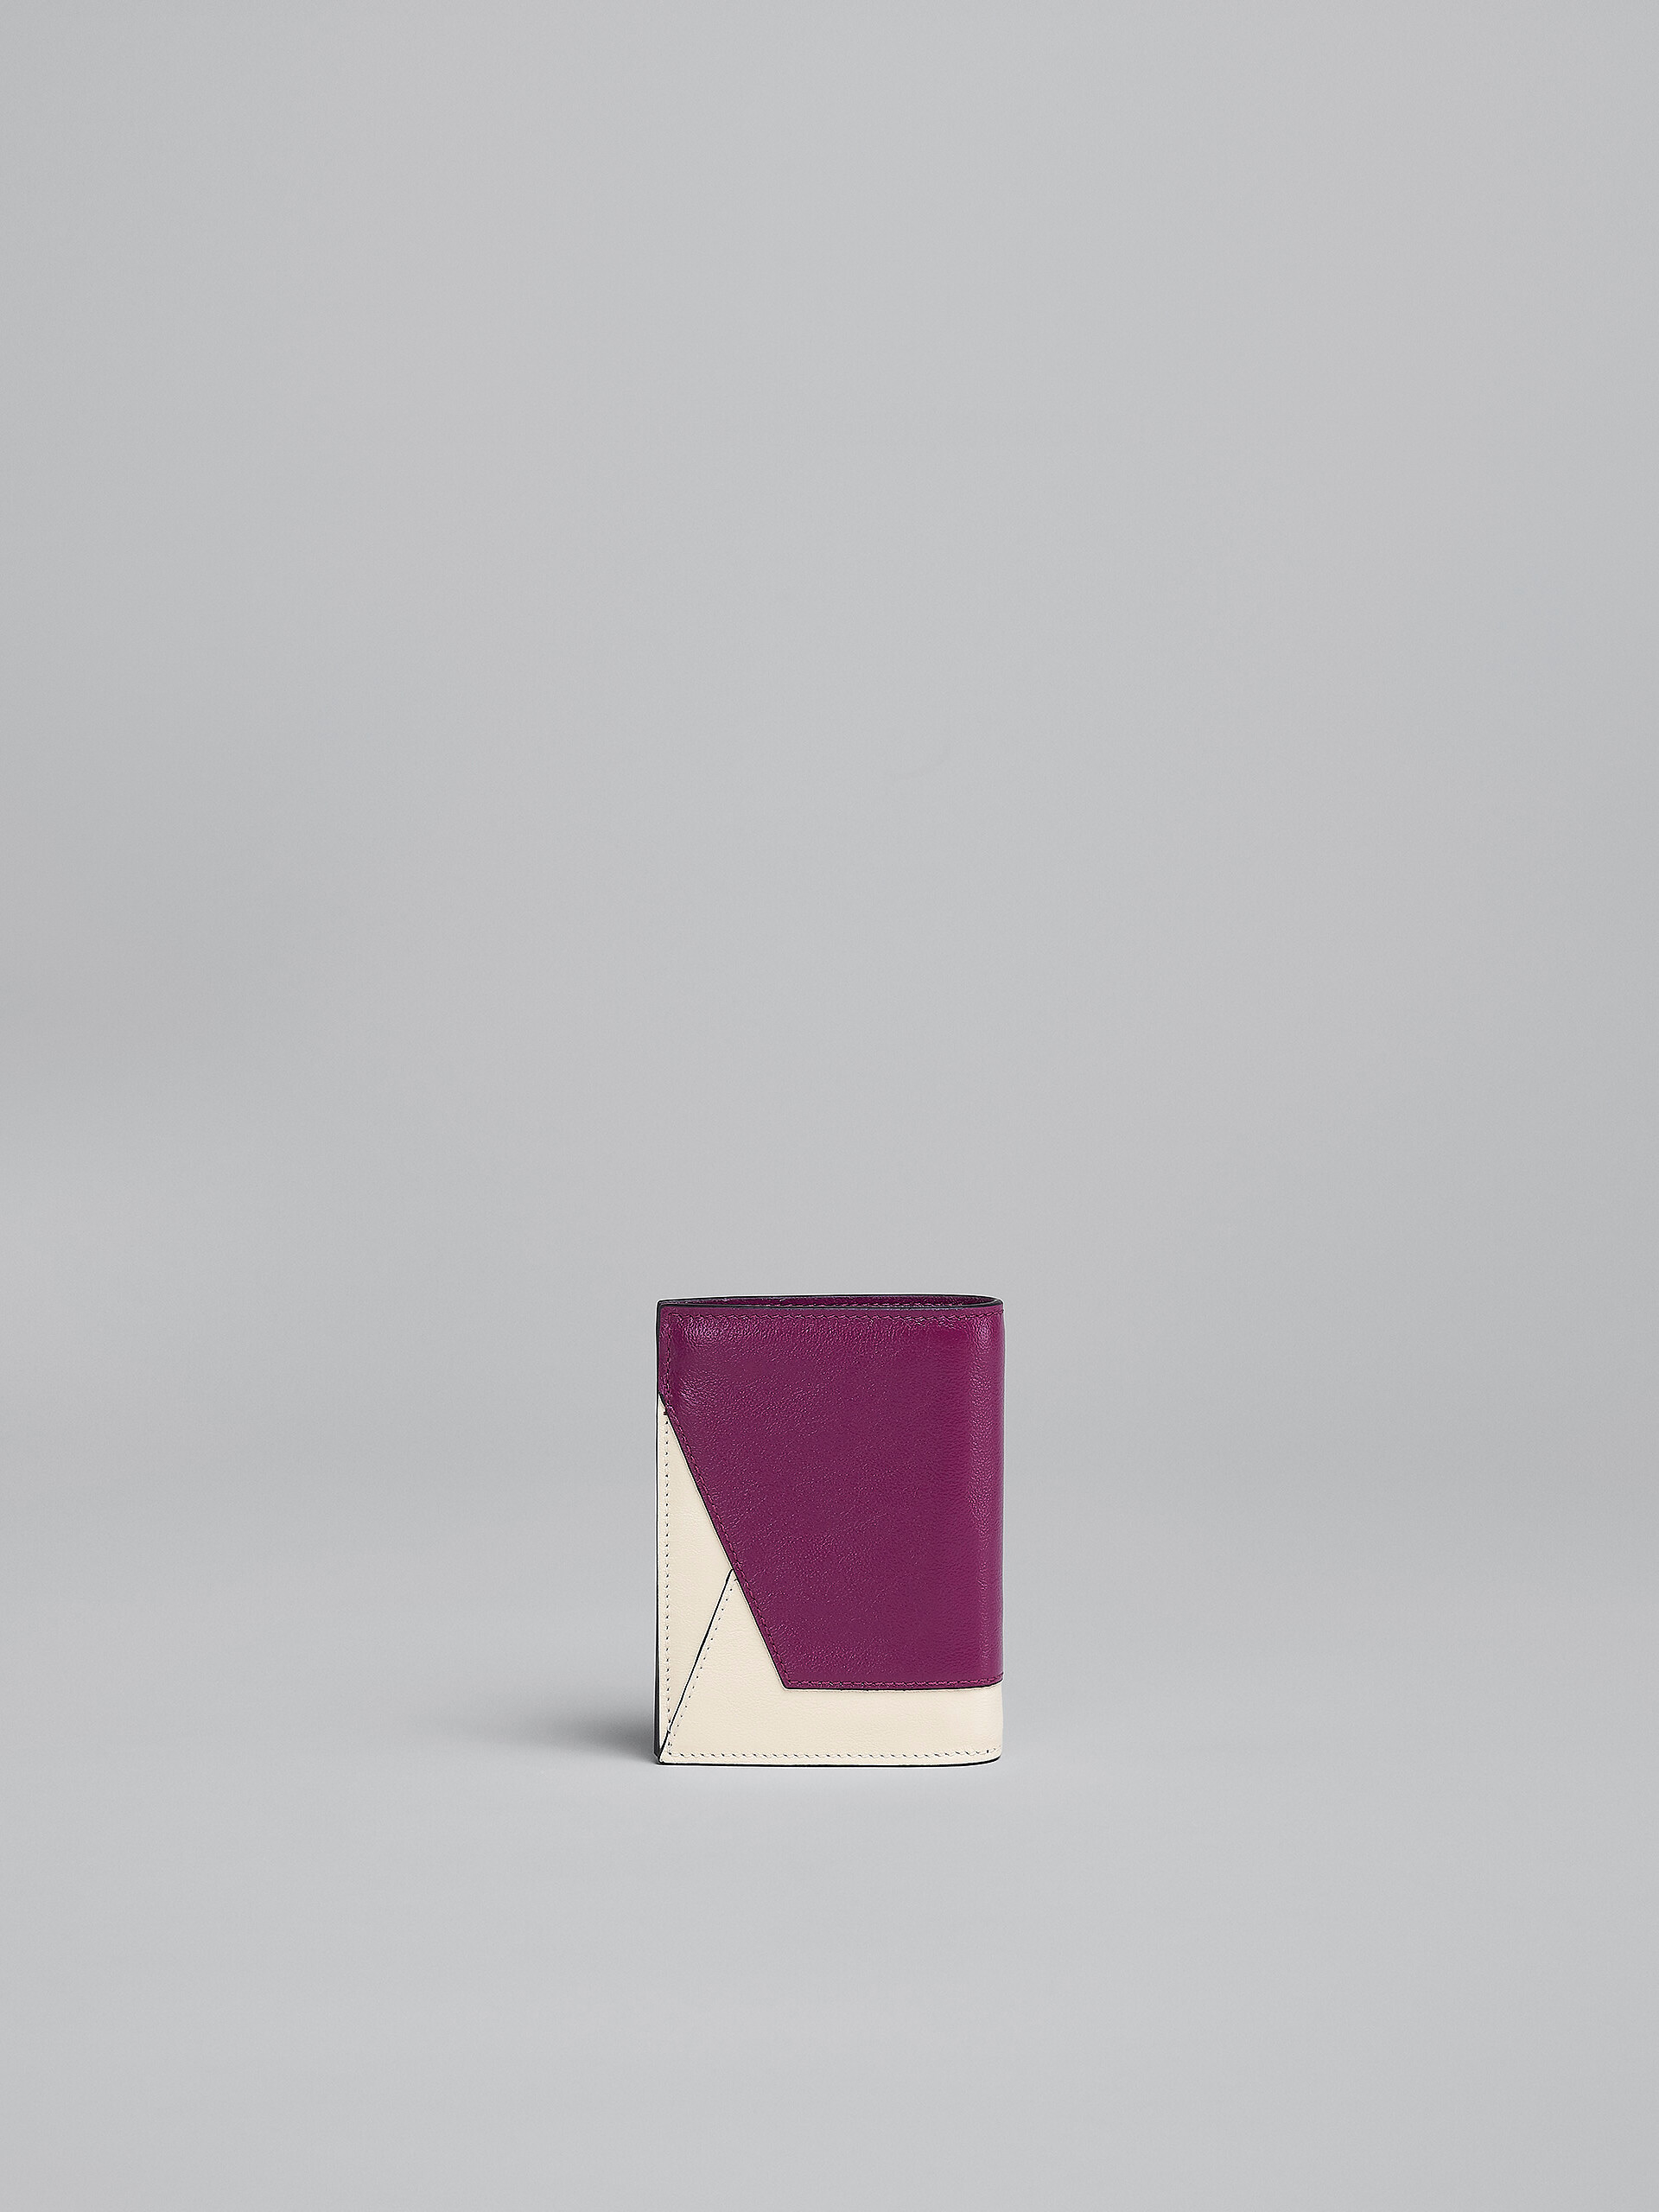 Purple and white leather bi-fold wallet - Wallets - Image 3